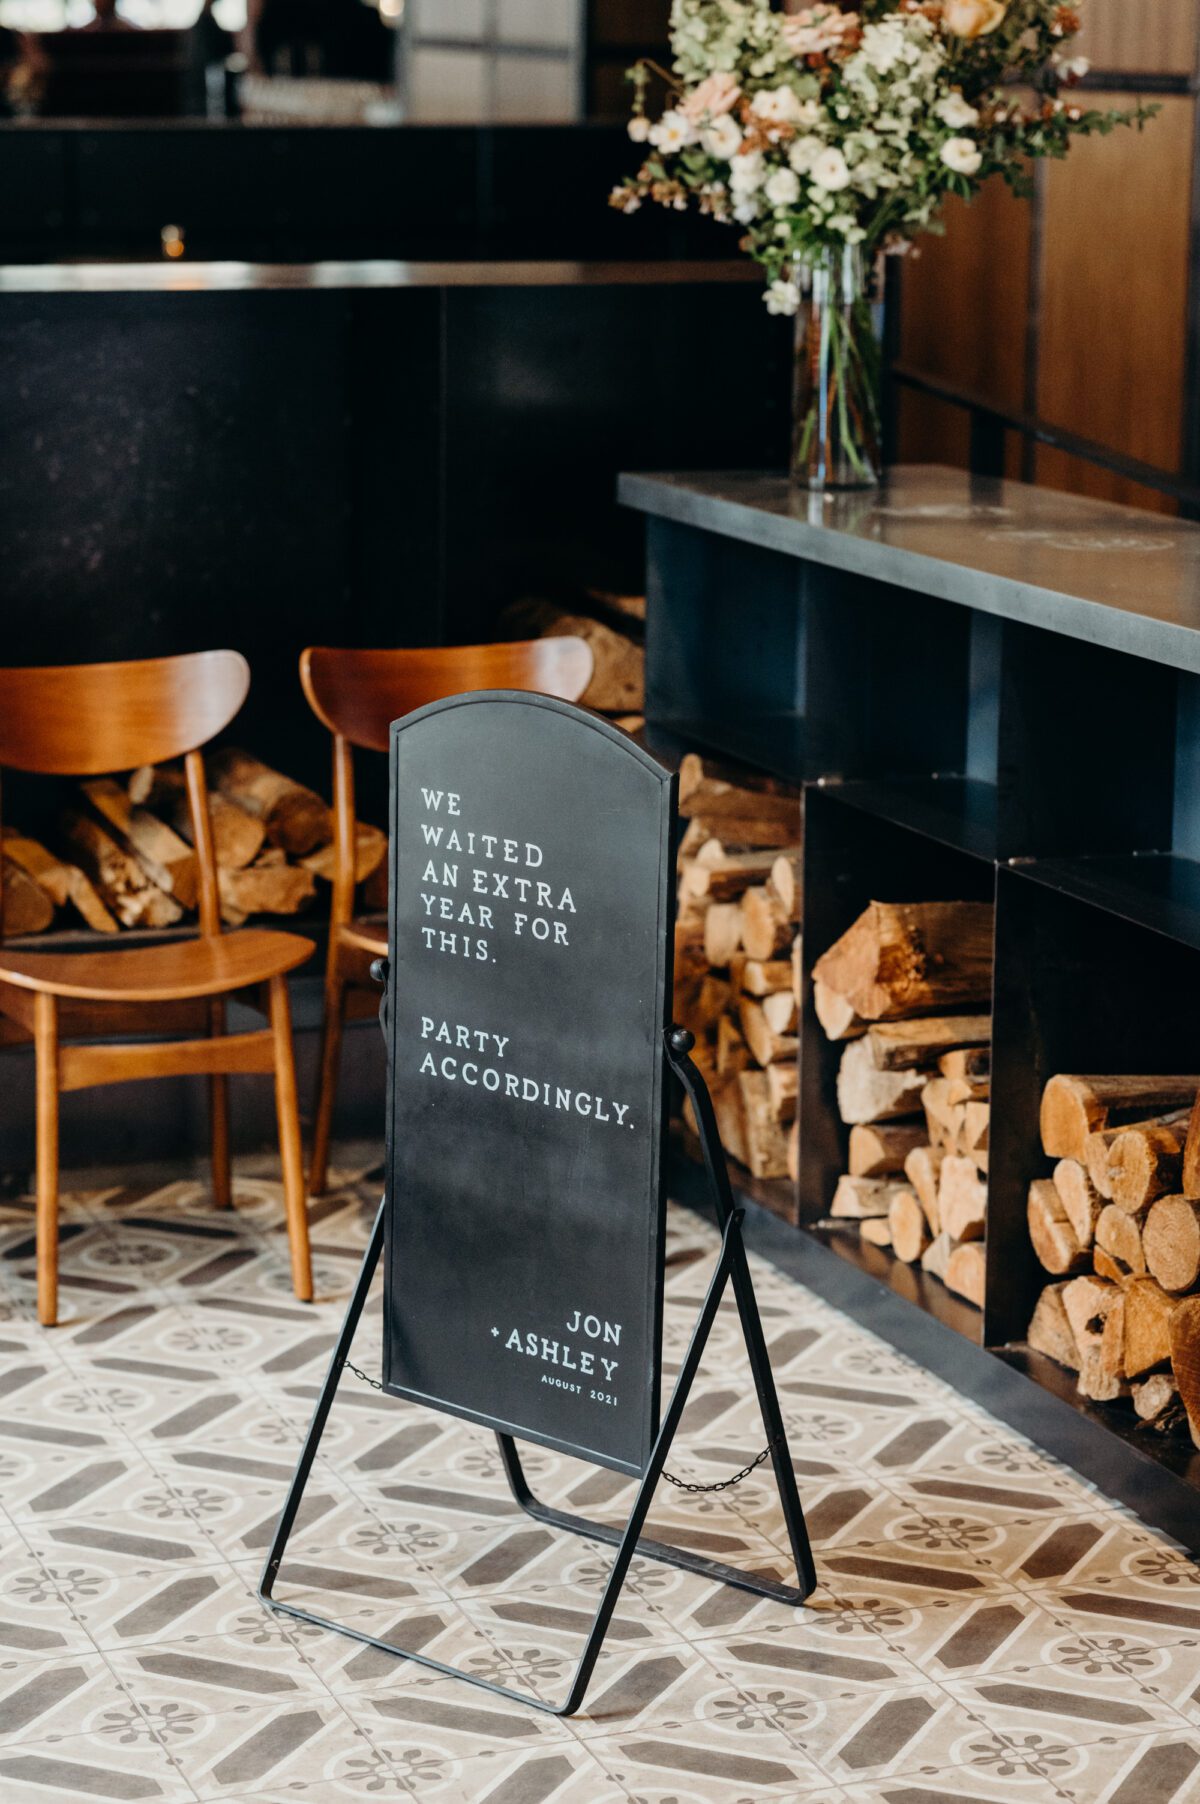 A modern black sign welcomes wedding guests to the indoor wedding venue Hunt & Gather Events. The background shows up a beautiful gray patterned tile floor, mid century wood chairs, and cubbies full of firewood.